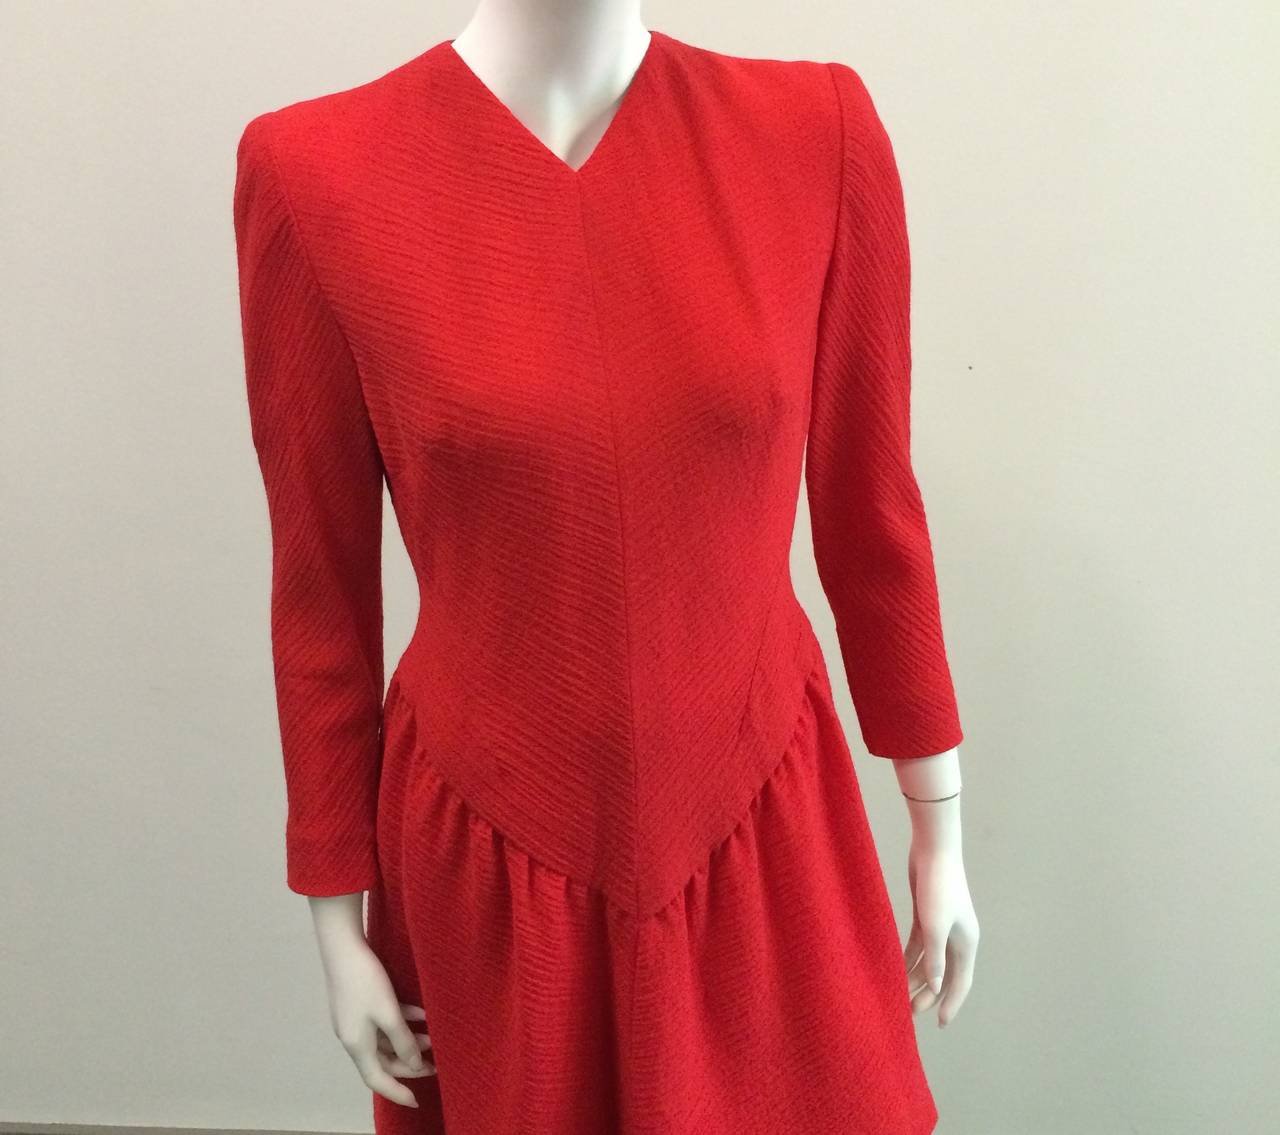 Pauline Trigere for Bergdorf Goodman 1980s red wool v neck short cocktail dress is a size 8 but is a modern day size 6.  The waist on this dress is 30